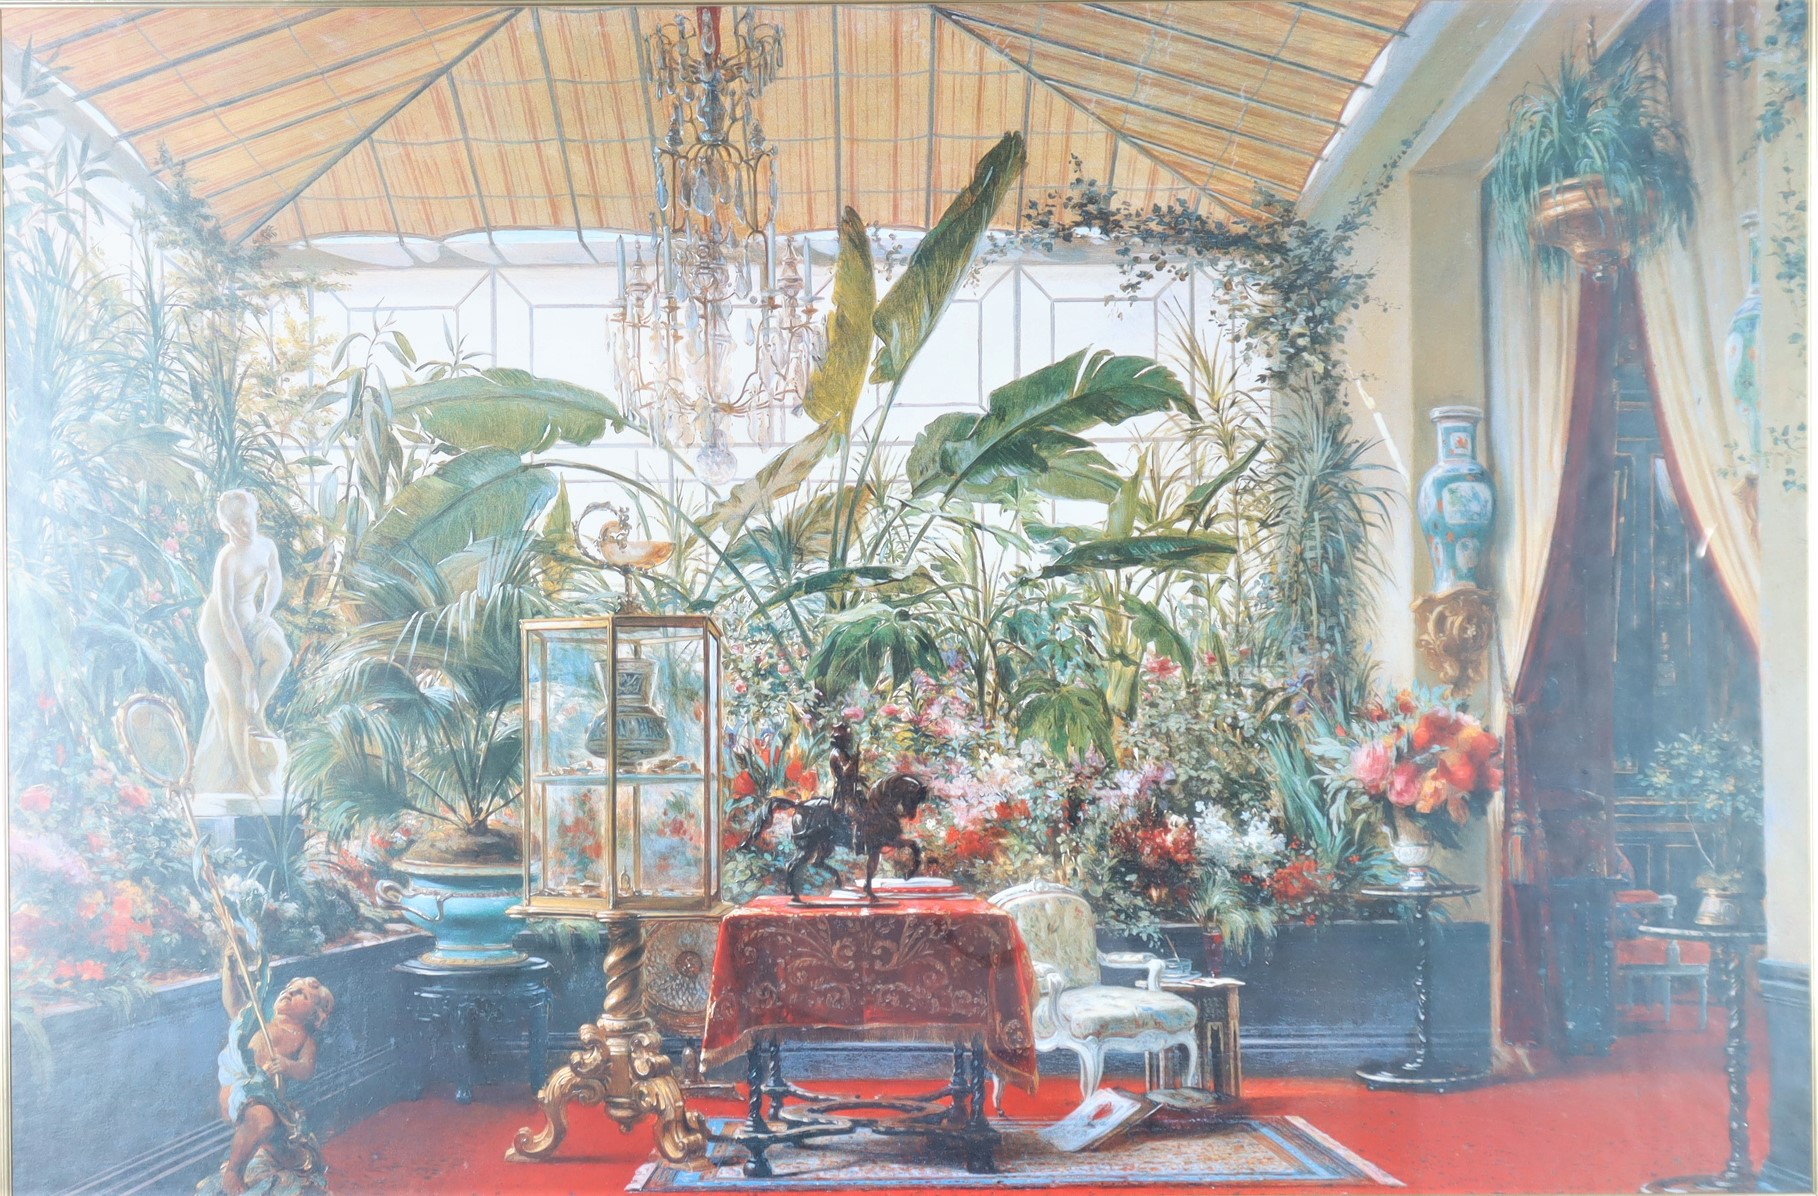 Large Victorian Conservatory Print - Image 4 of 5